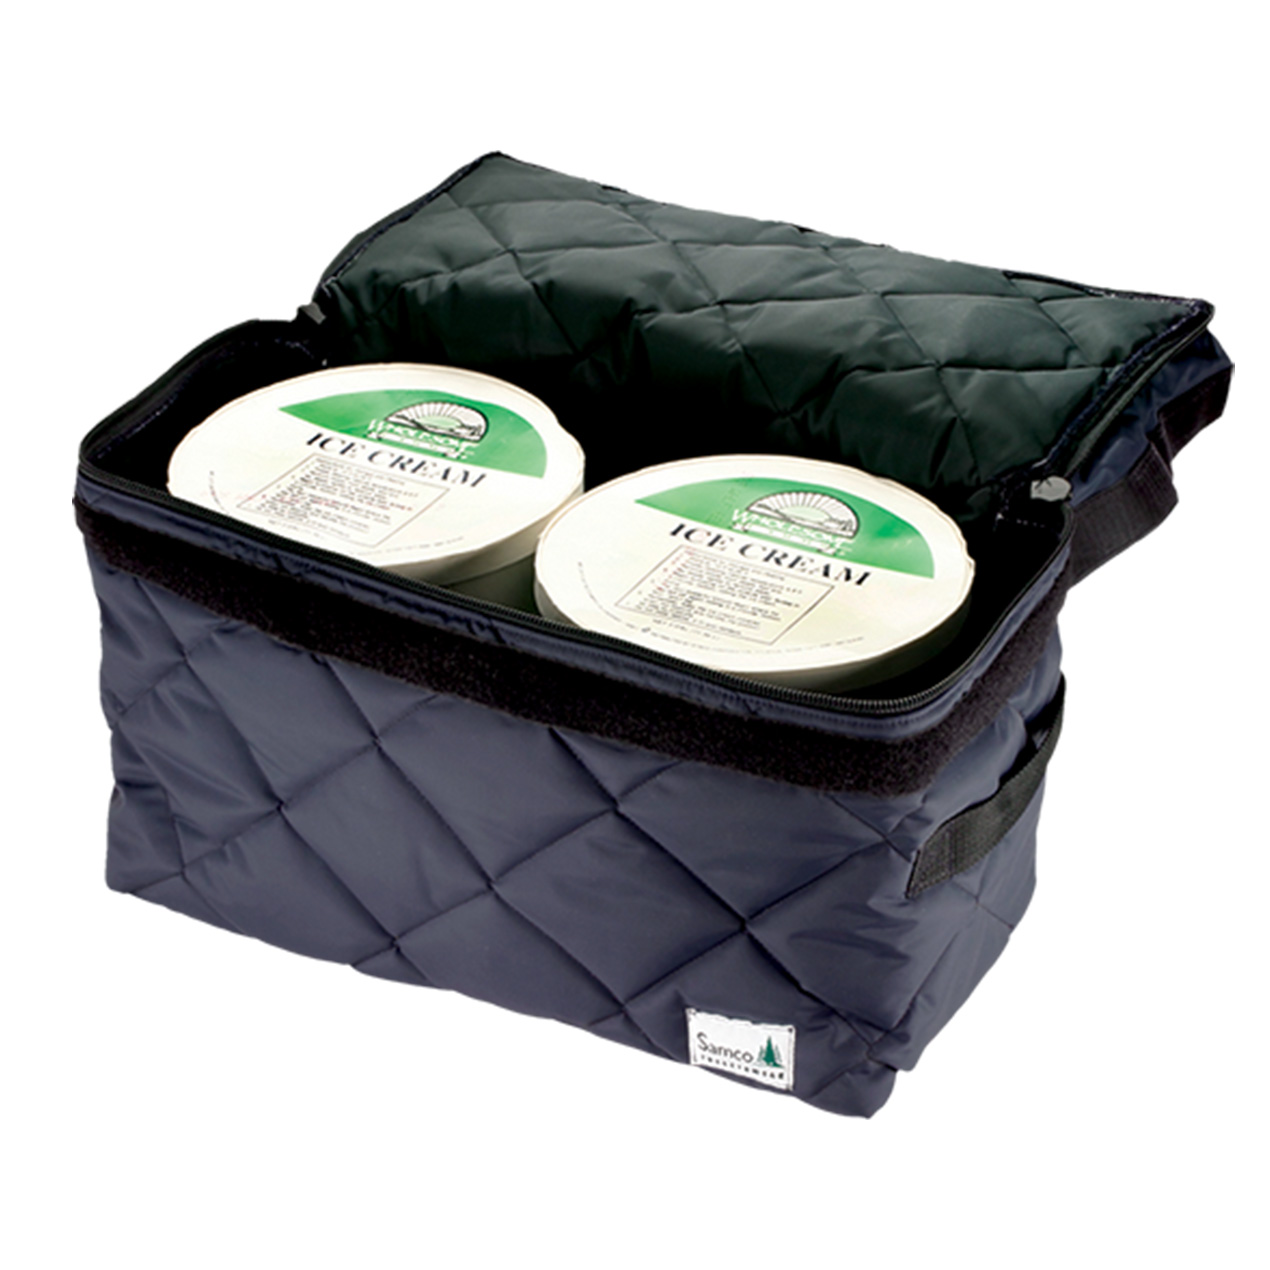 http://www.freezerwear.com/Shared/Images/Product/TB51-Two-Tub-Ice-Cream-Bag/Samco_accessories_TB51.jpg